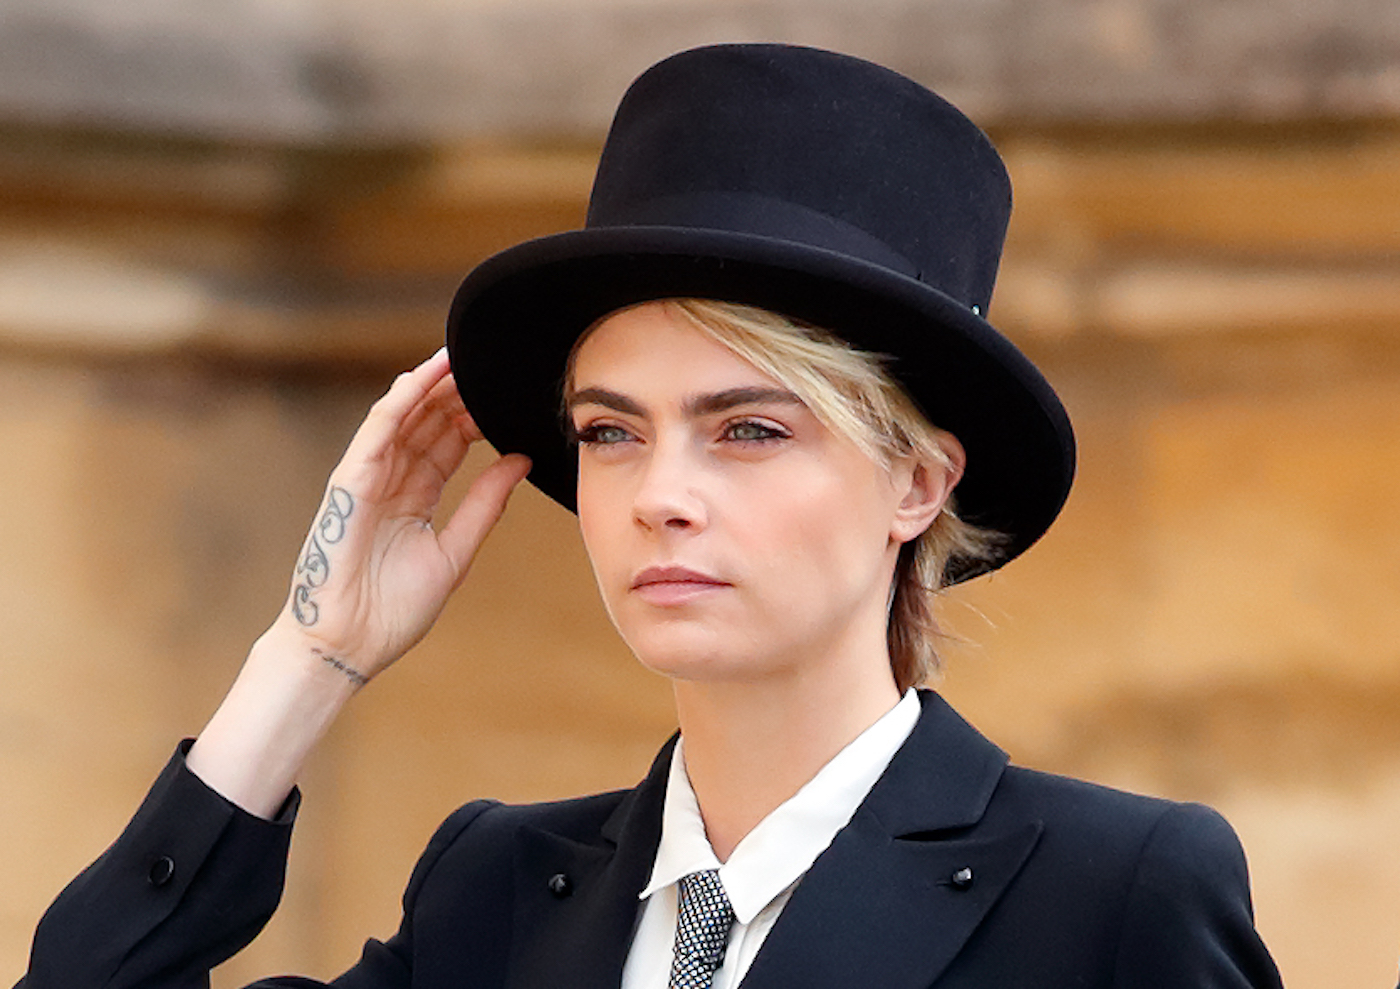 The Secret Story Behind The Suit Cara Delevingne Wore To Princess Eugenie’s Wedding